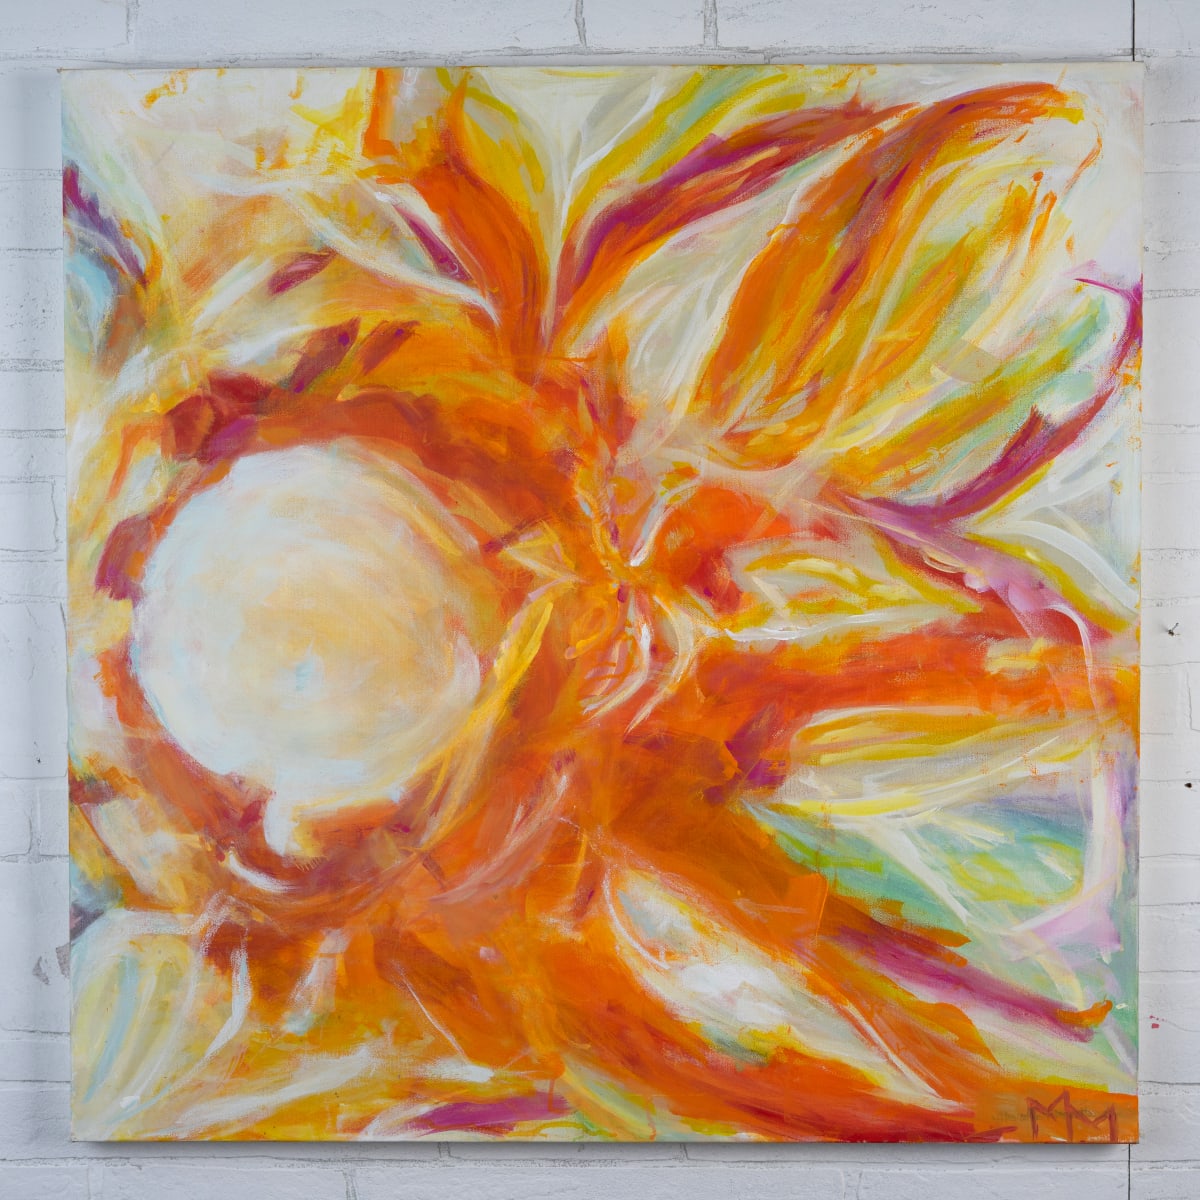 Solar Flare by Michelle M Marcotte  Image: Michelle M Marcotte
Solar Flare, 2022
Acrylic on Canvas
36" x 36" x 1.5"
$650.00
